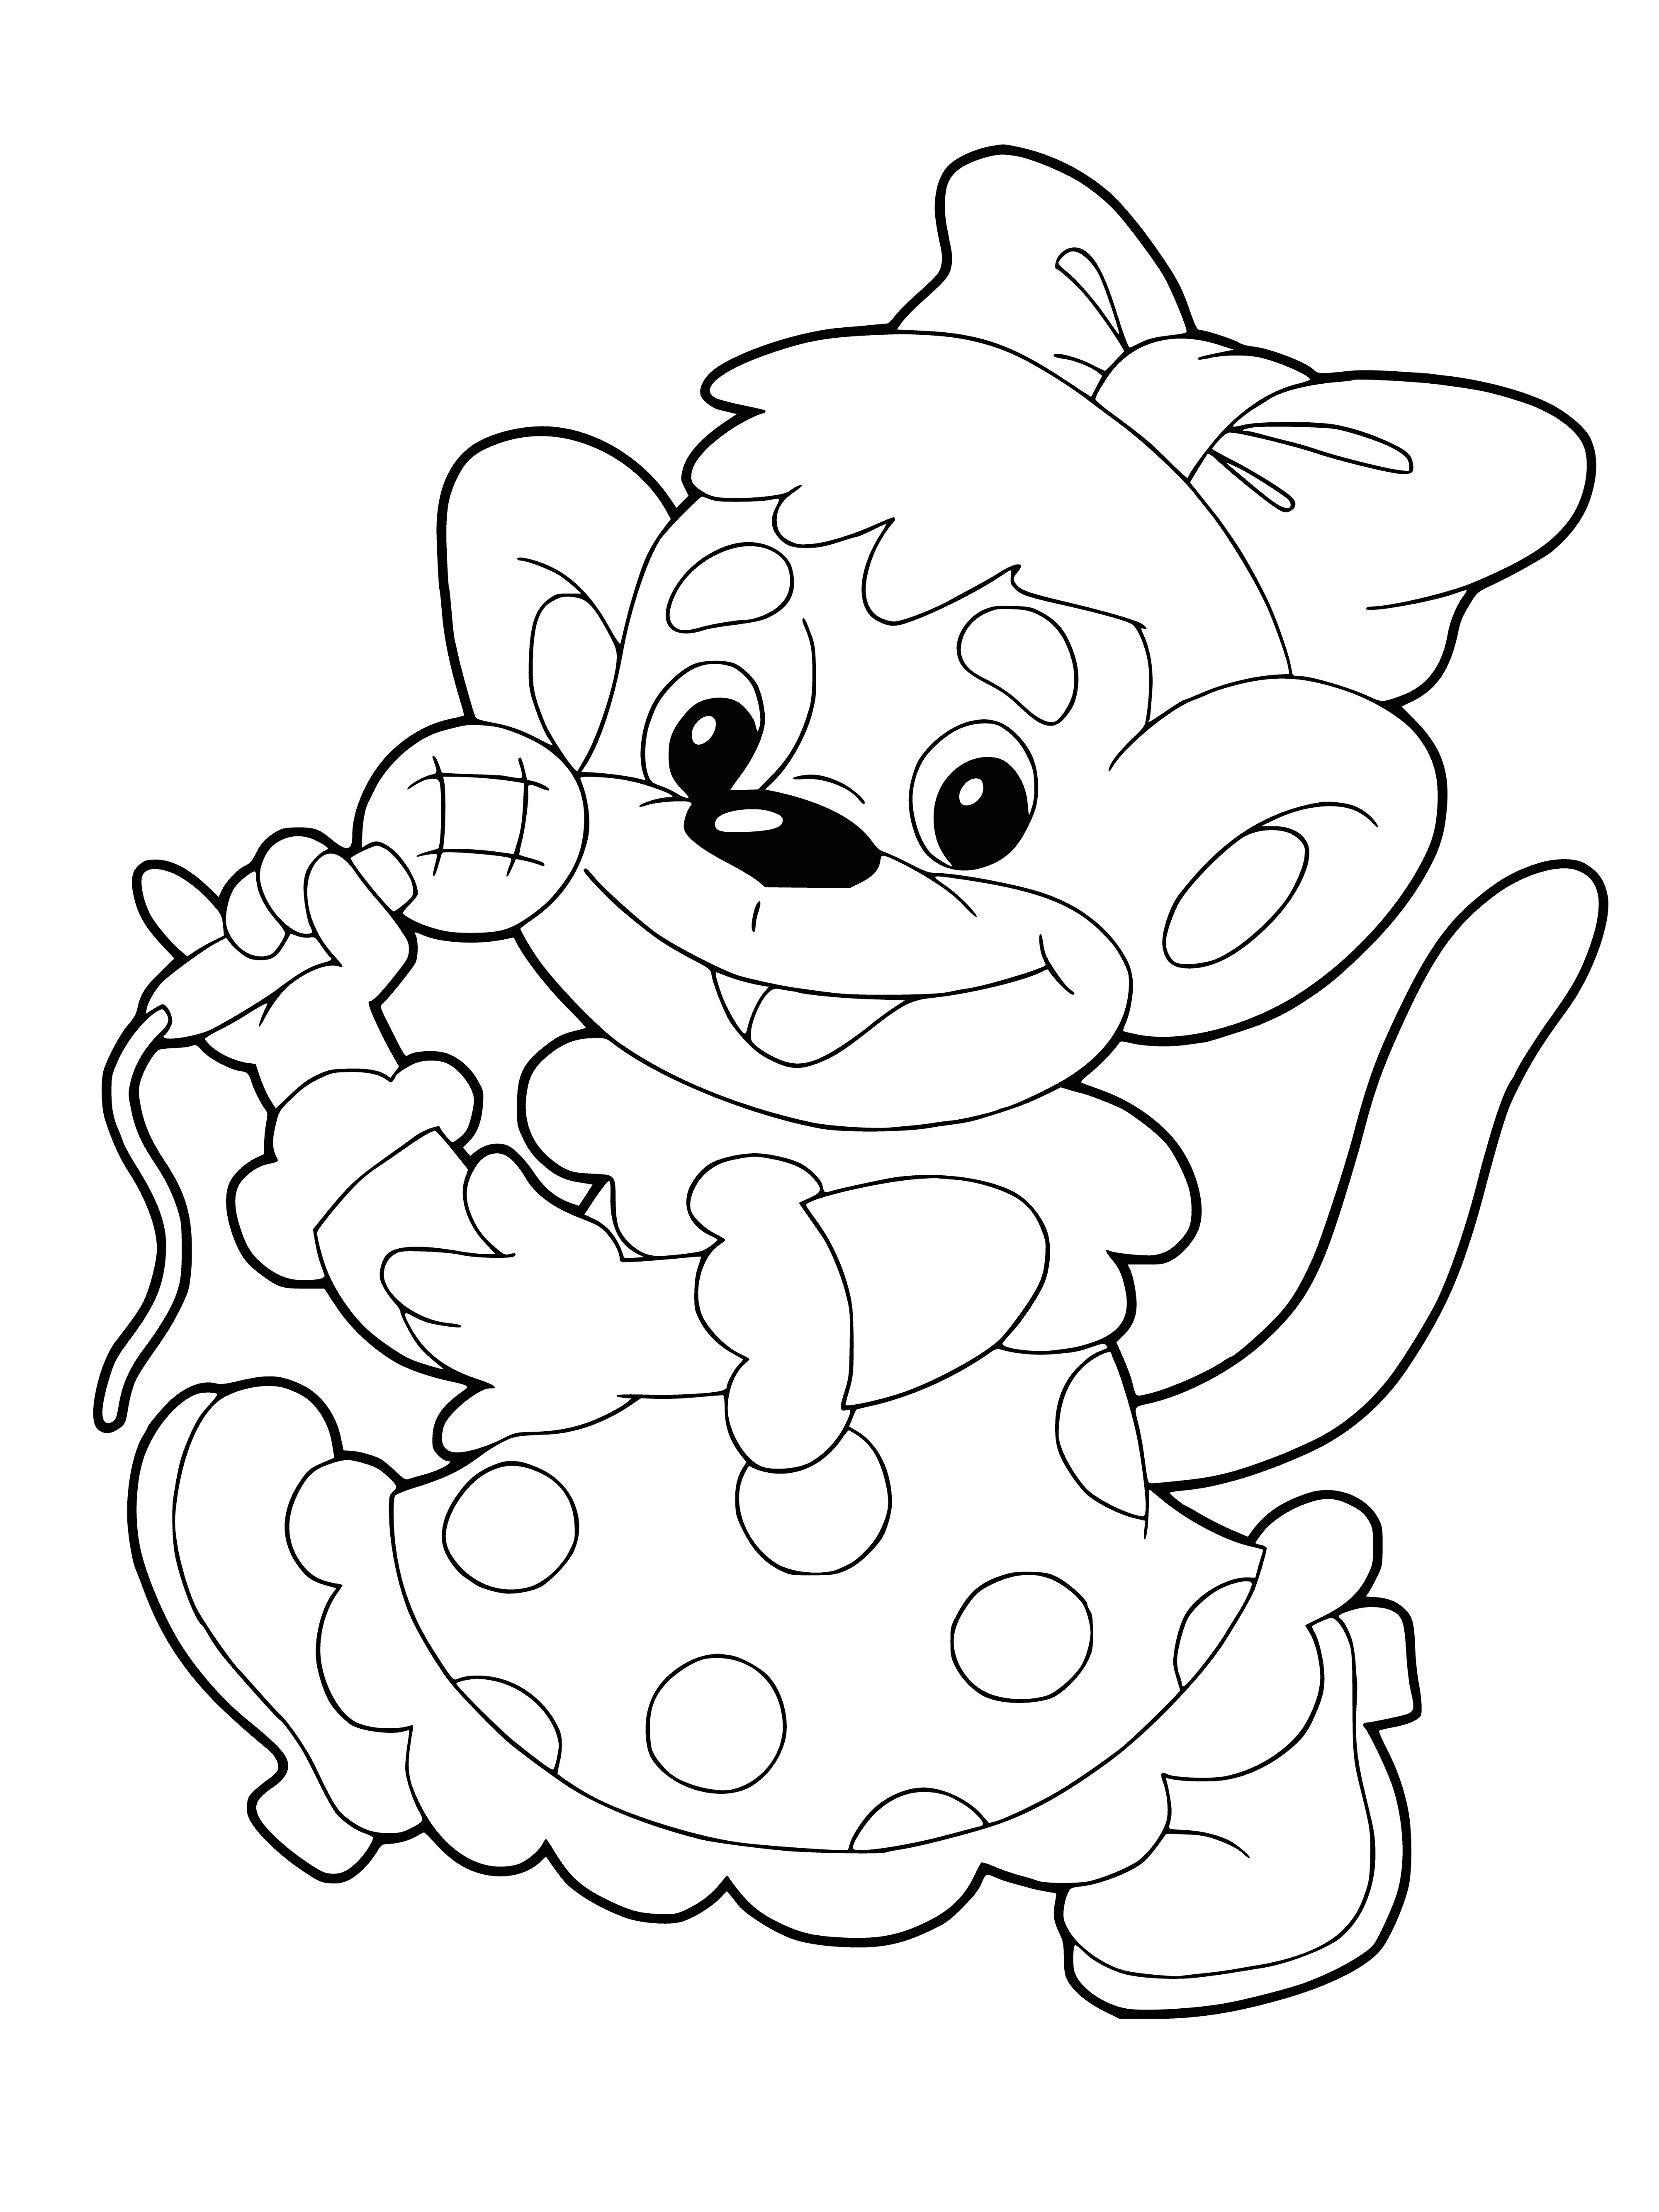 coloring page: Monkey on a stool with mic, eyes closed, slightly open mouth.